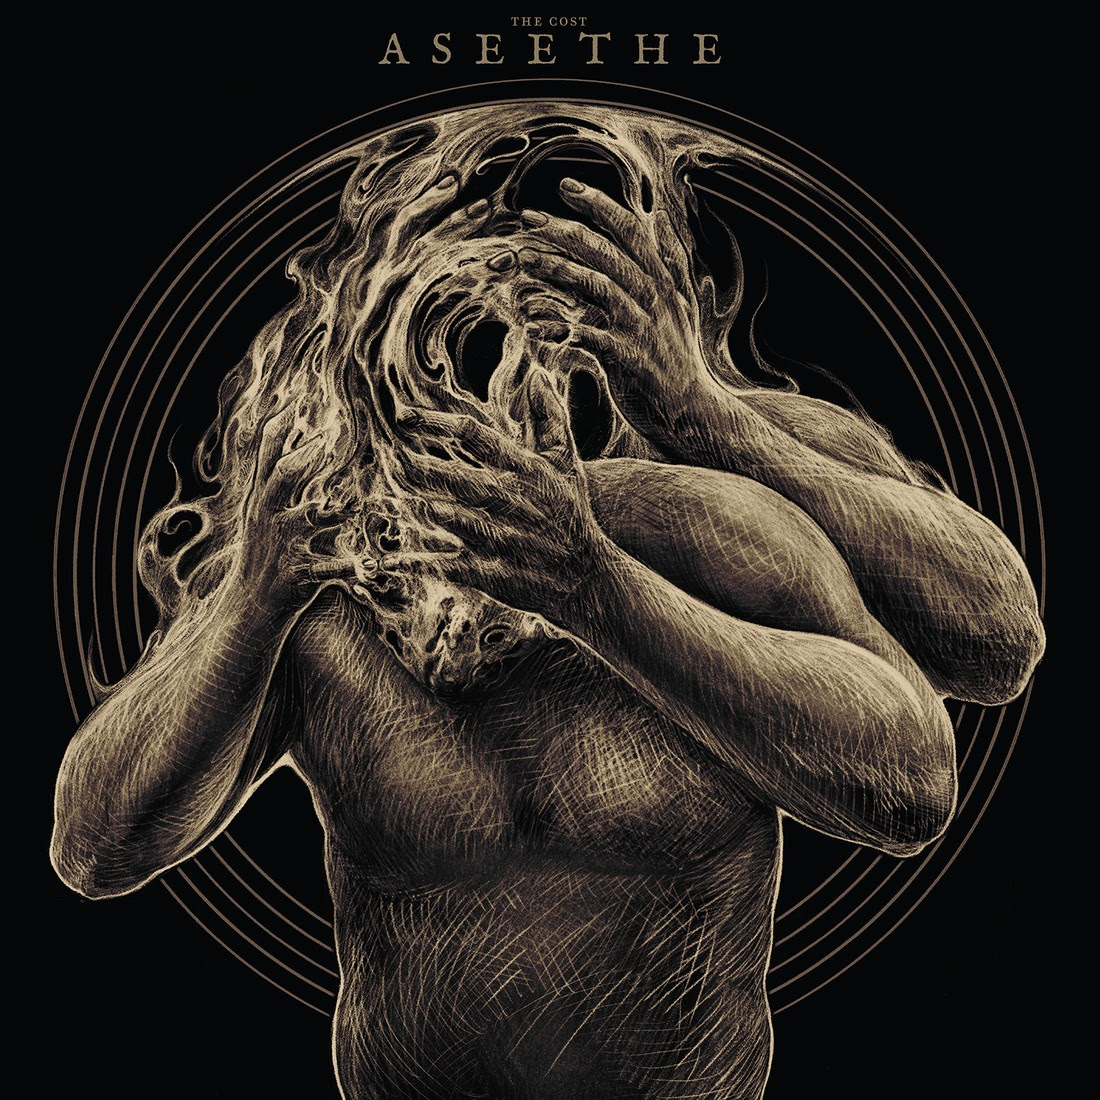 Aseethe announce new album The Cost